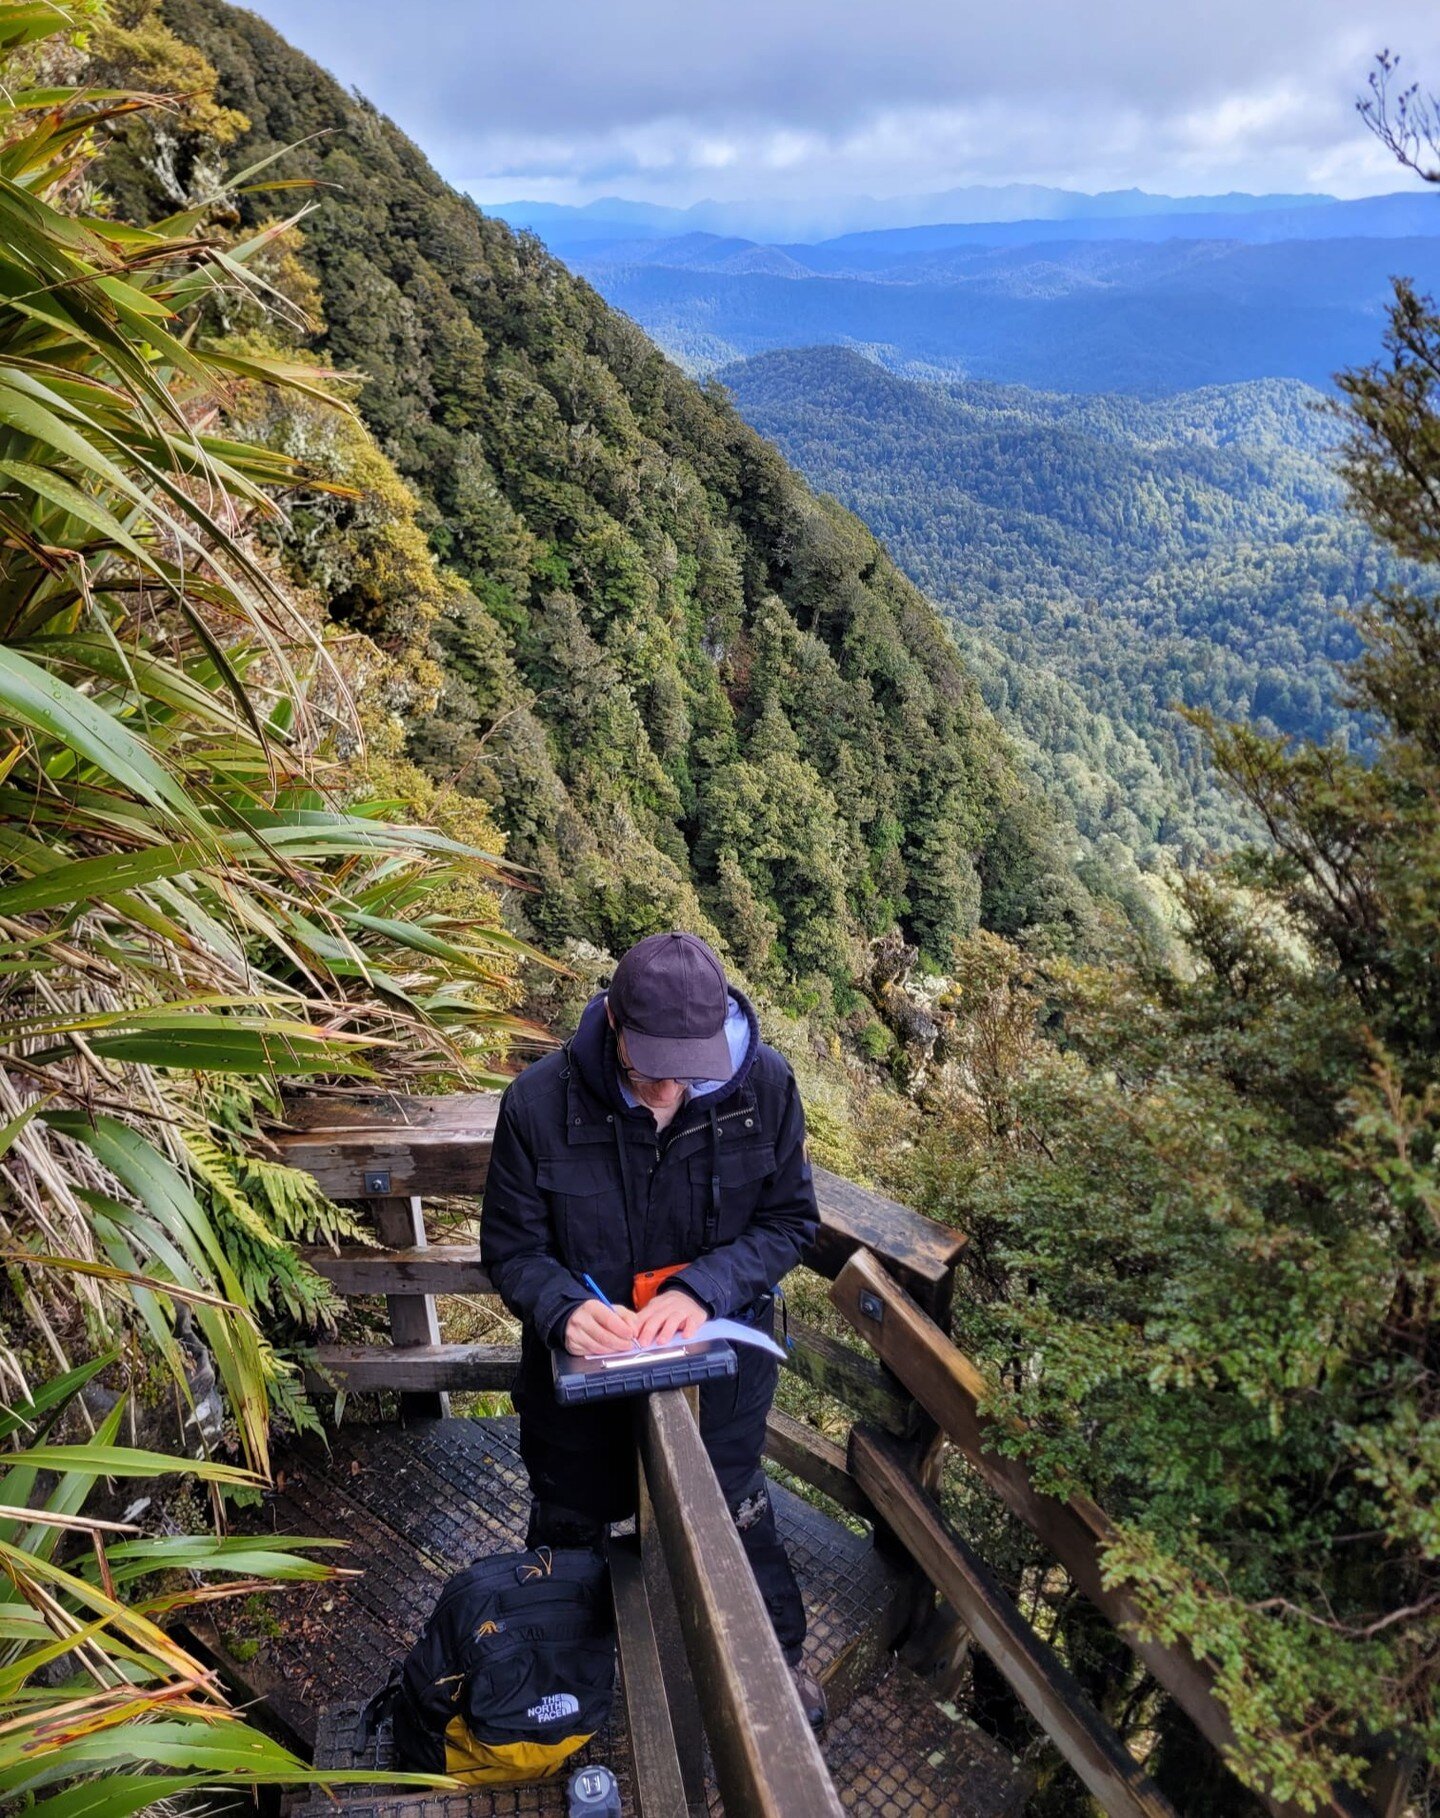 Four seasons in one day, that&rsquo;s what Brian faced on his latest adventure around Lake Waikaremoana last week. Walking 50km (approx. 2/3 around the Lake) Brian spent 3 days assisting the Te Papa Atawhai (Department of Conservation) with structure